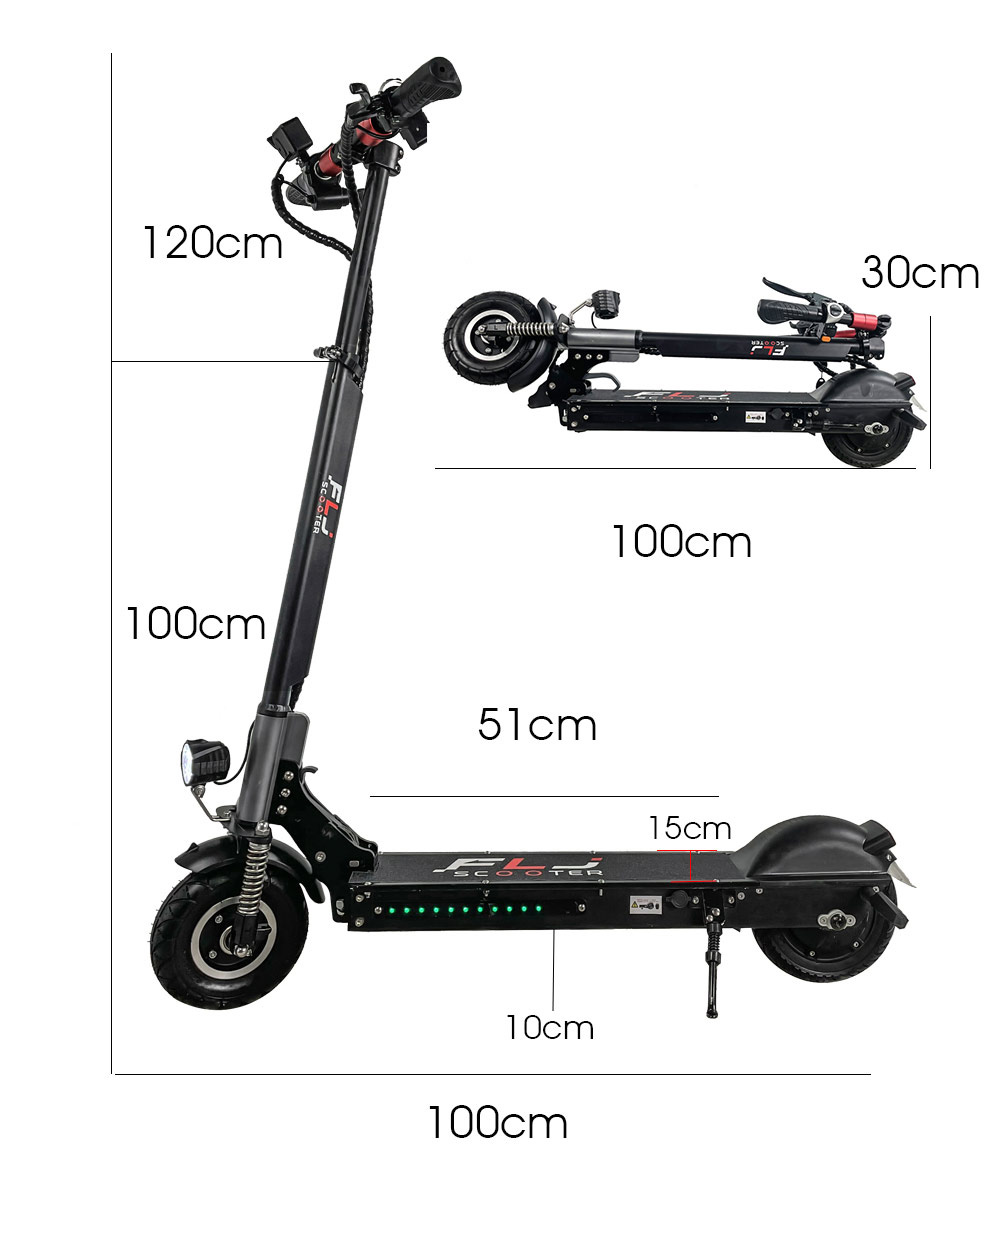 https://img.gkbcdn.com/s3/d/202209/FLJ-C8-800W-Motor-Electric-Scooter-without-Seat-517212-11.jpg